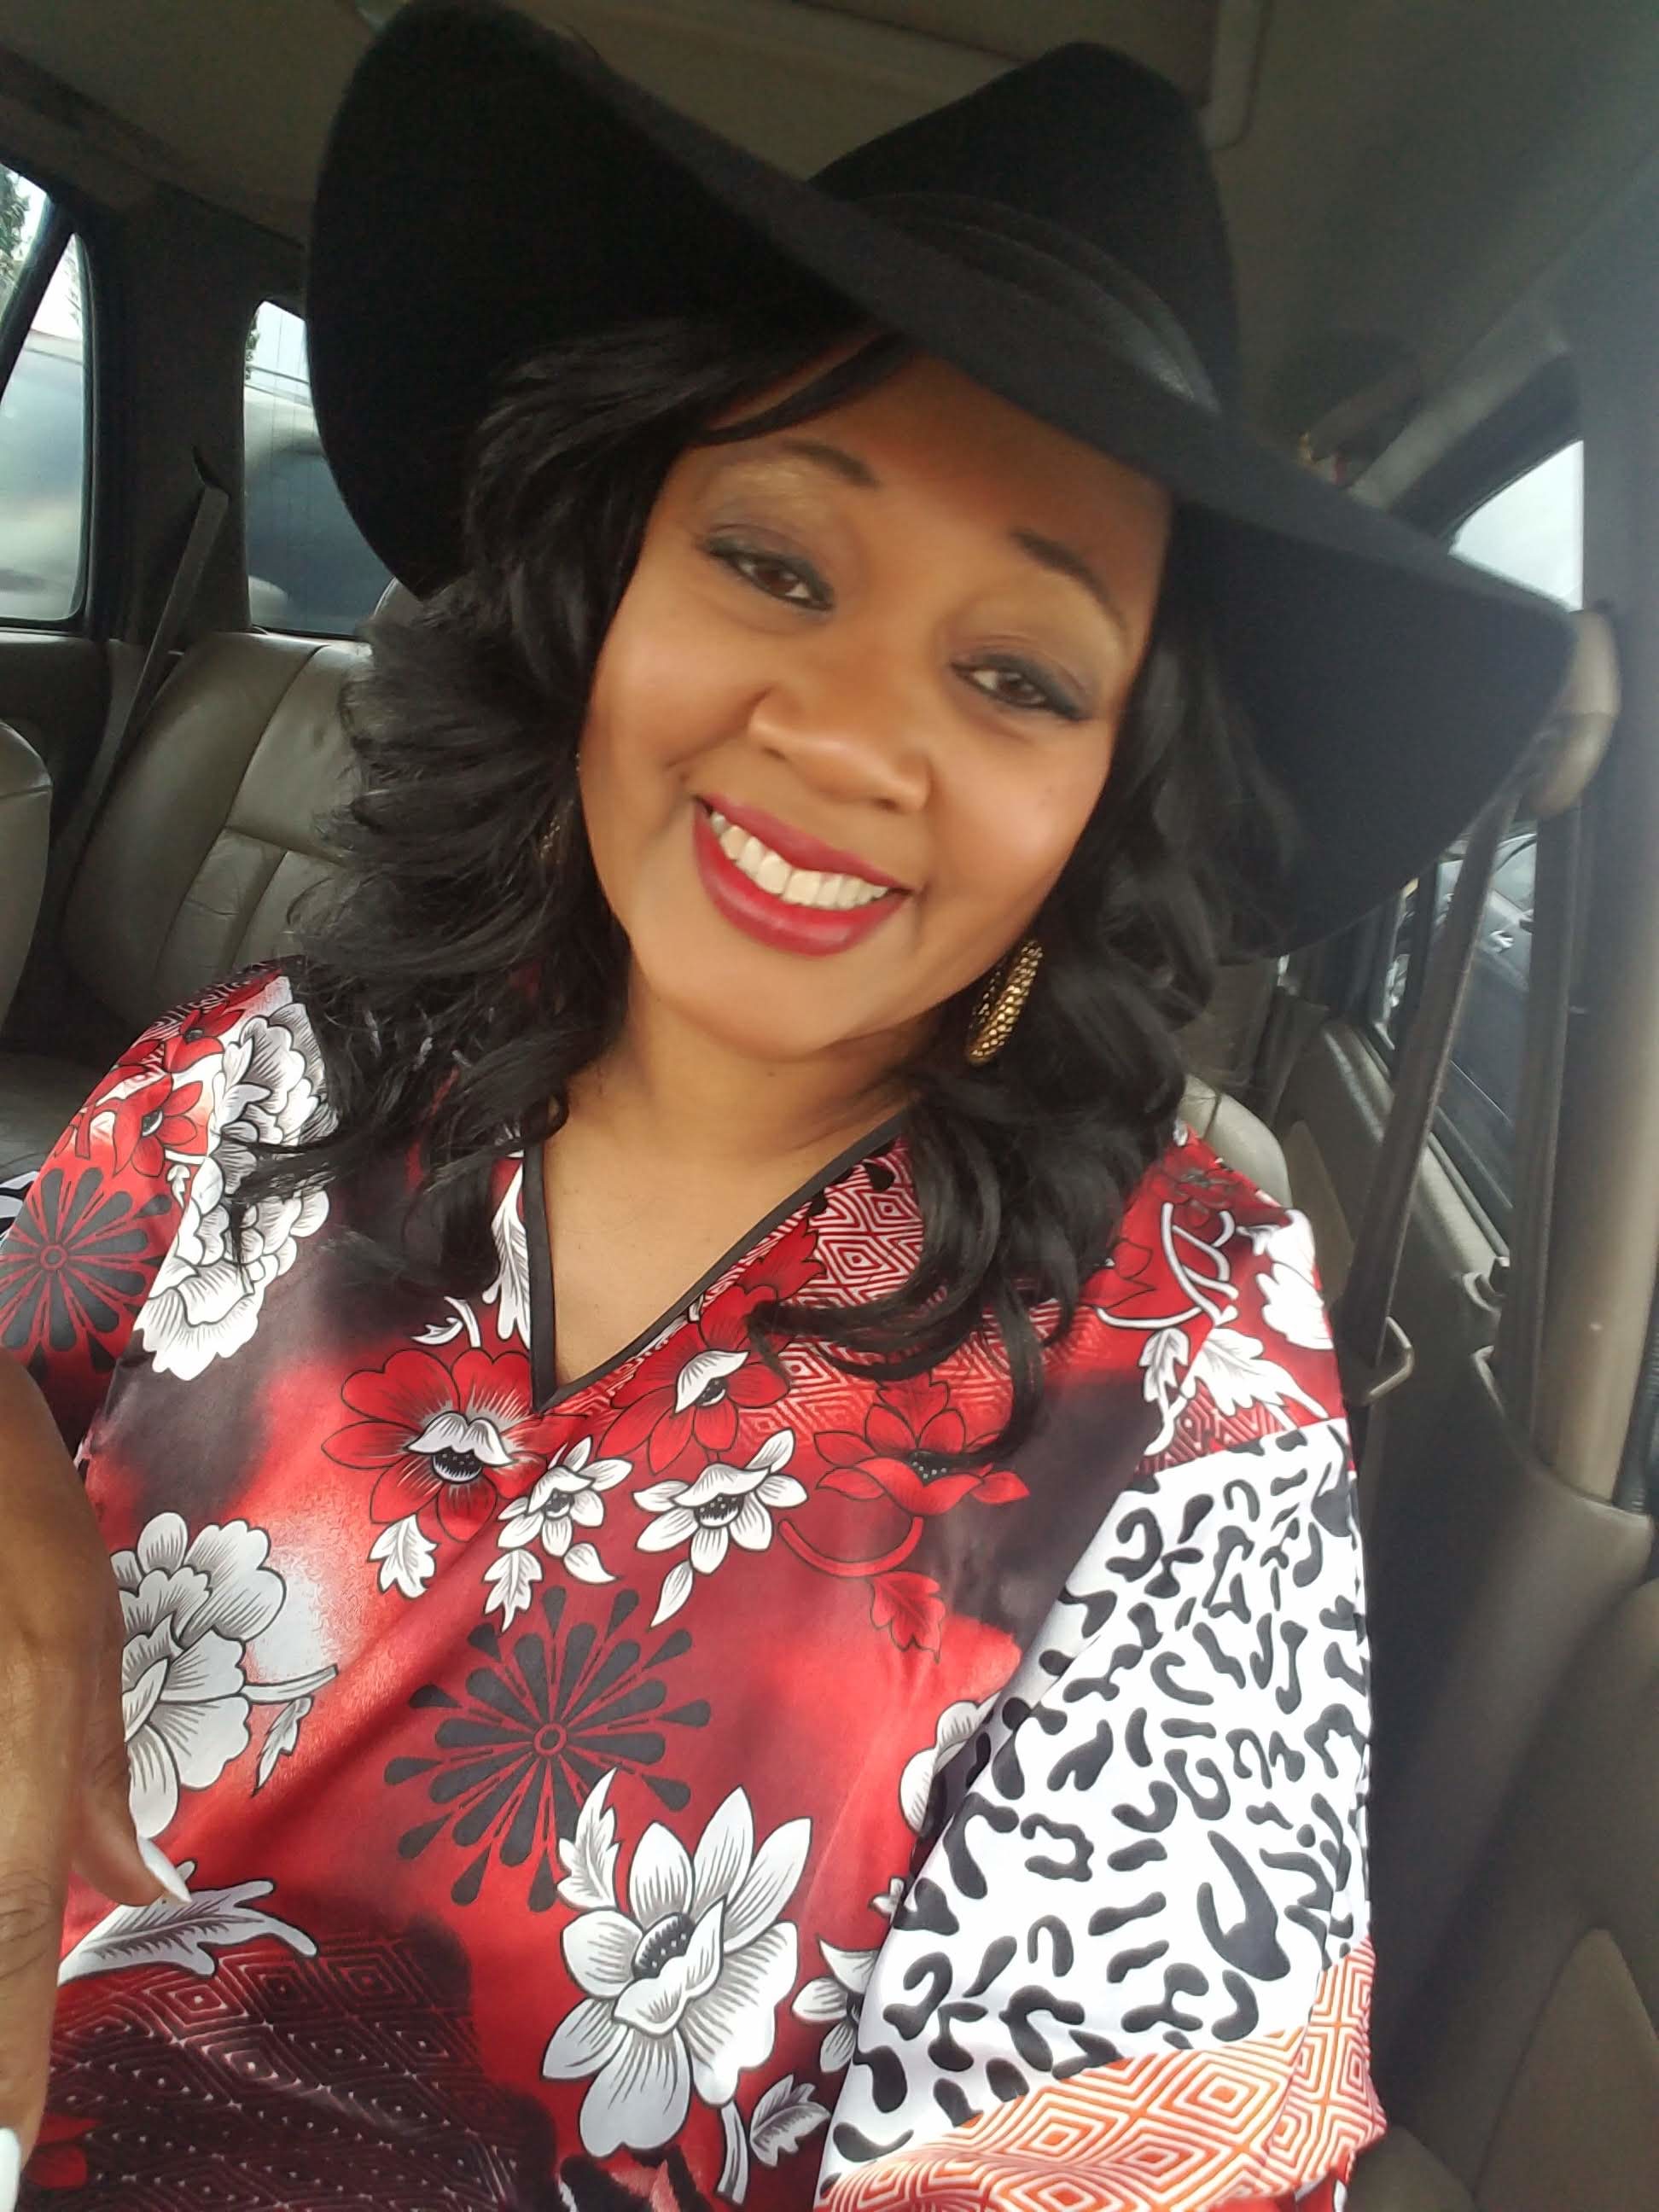 A black woman sitting in a car, wearing a black cowboy style hat and a red, white and black floral caftan.